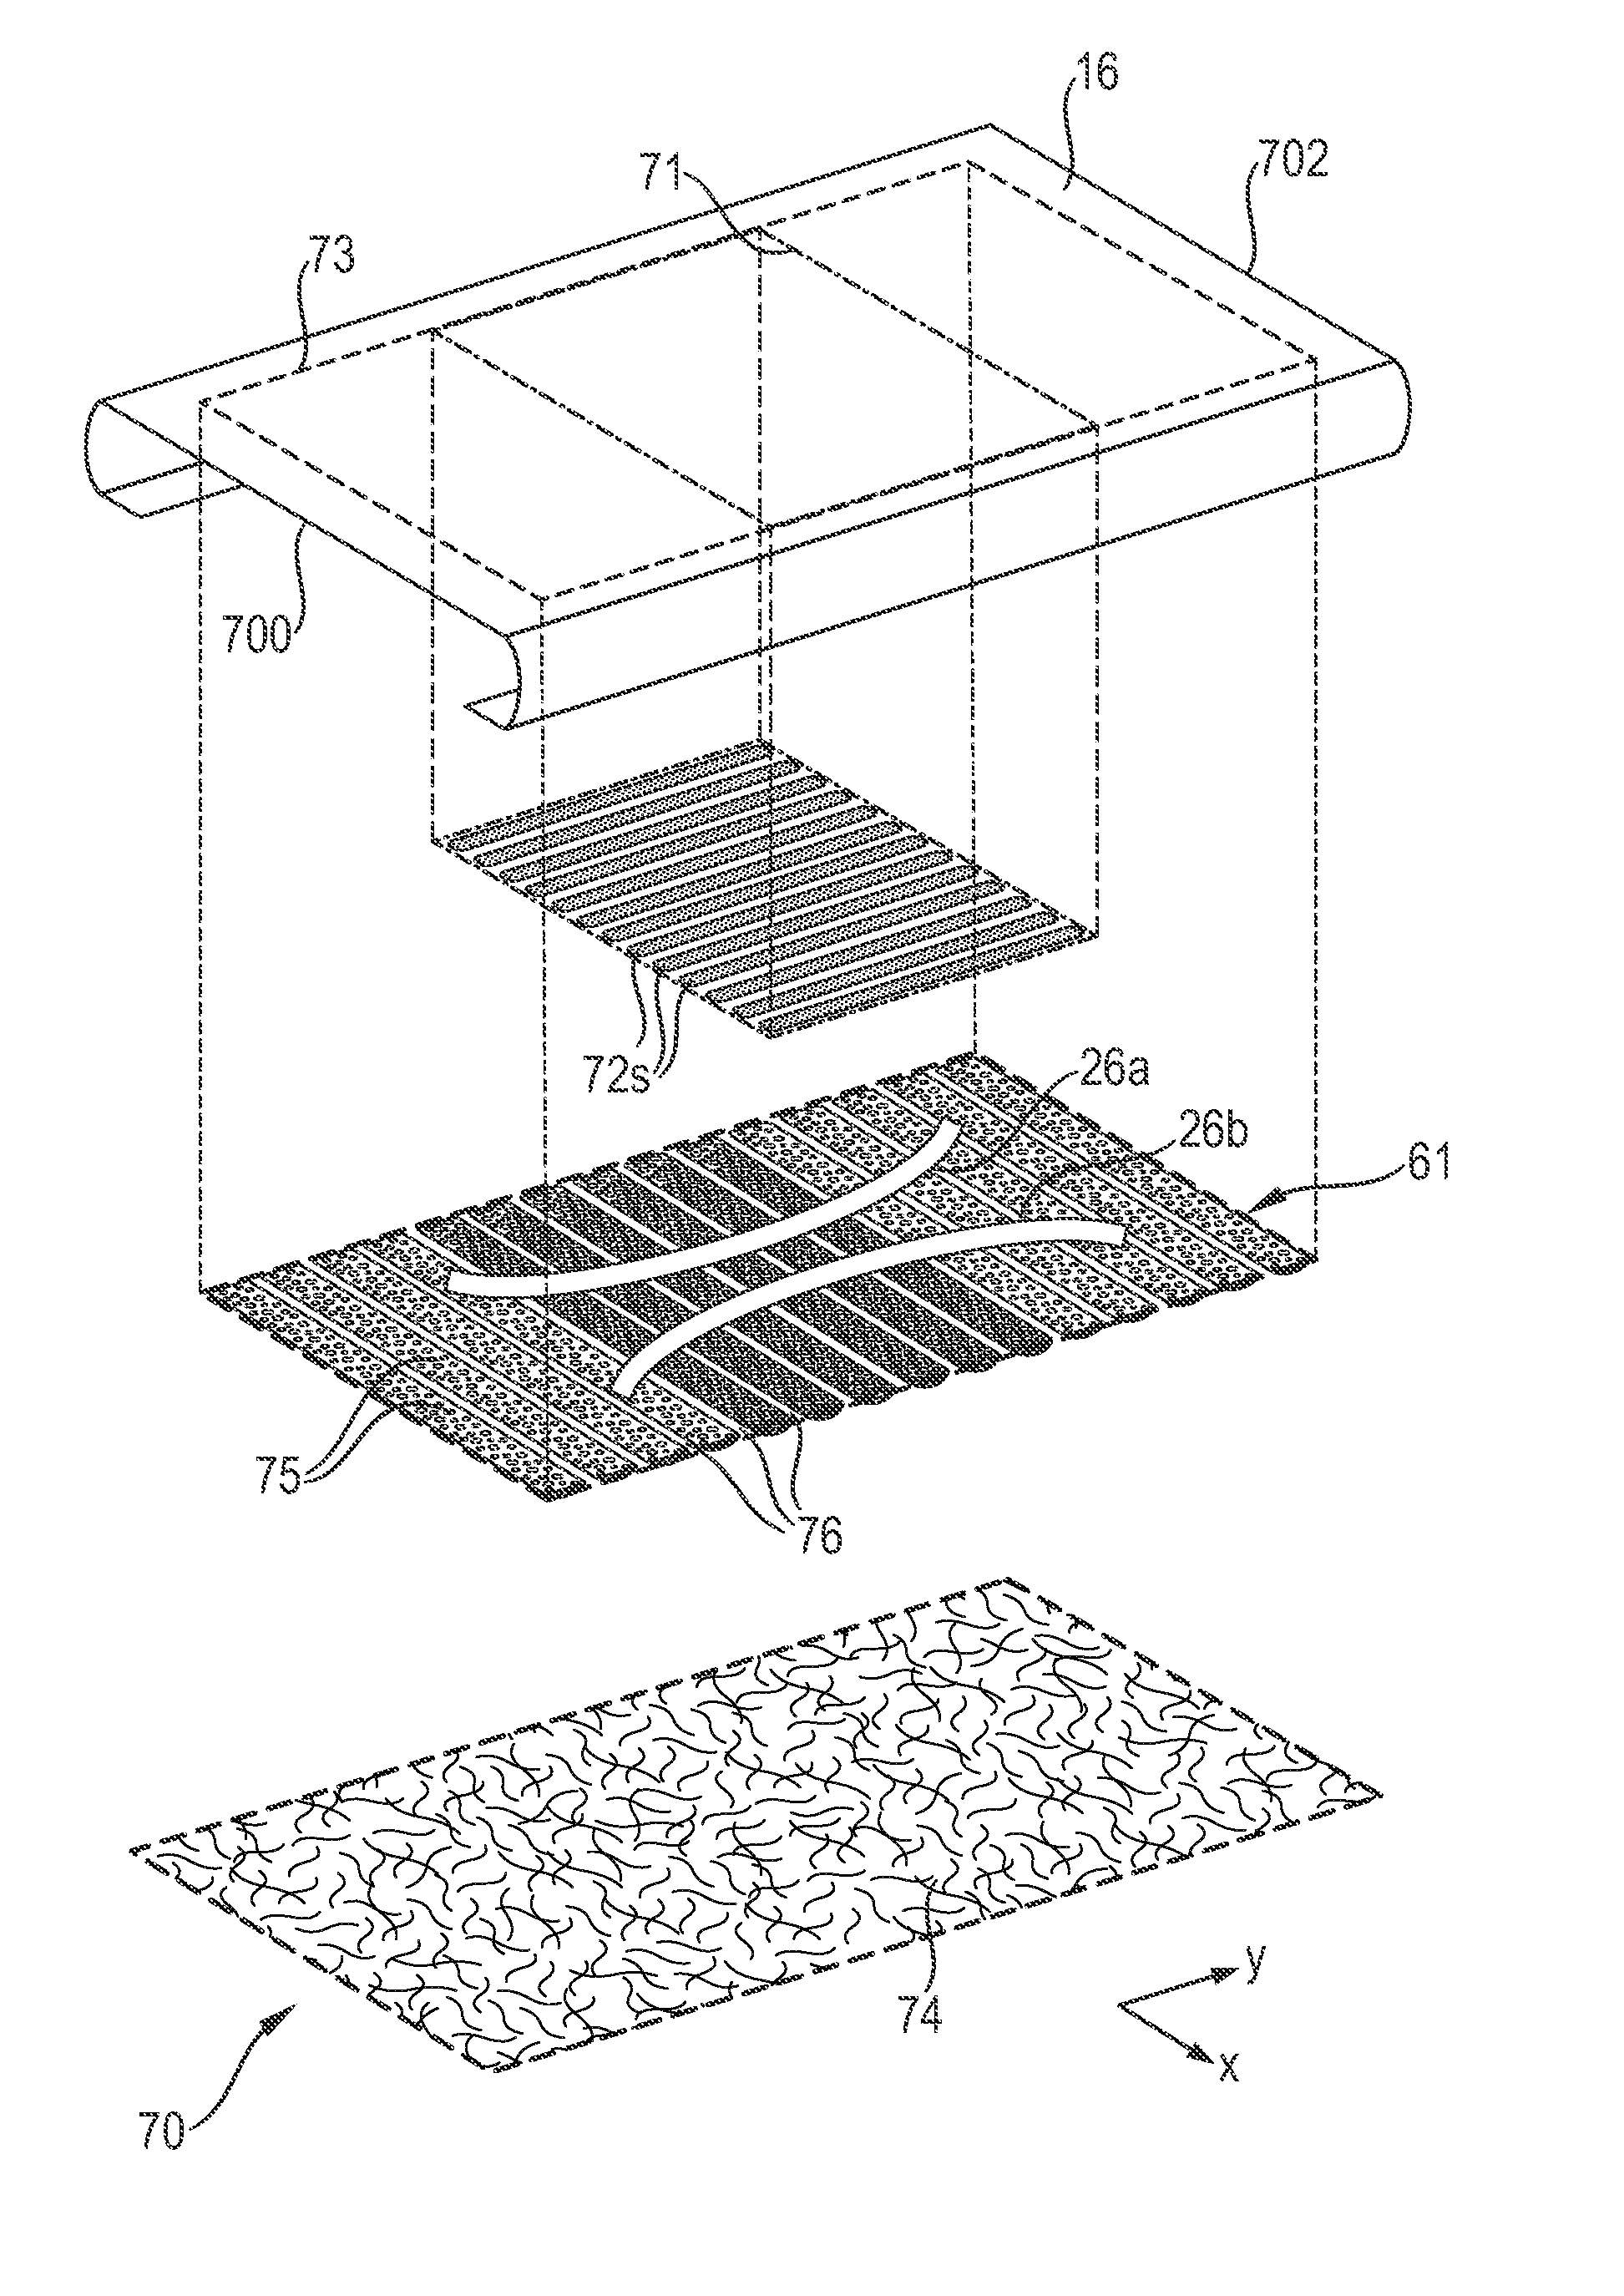 Absorbent cores having channel-forming areas and c-wrap seals